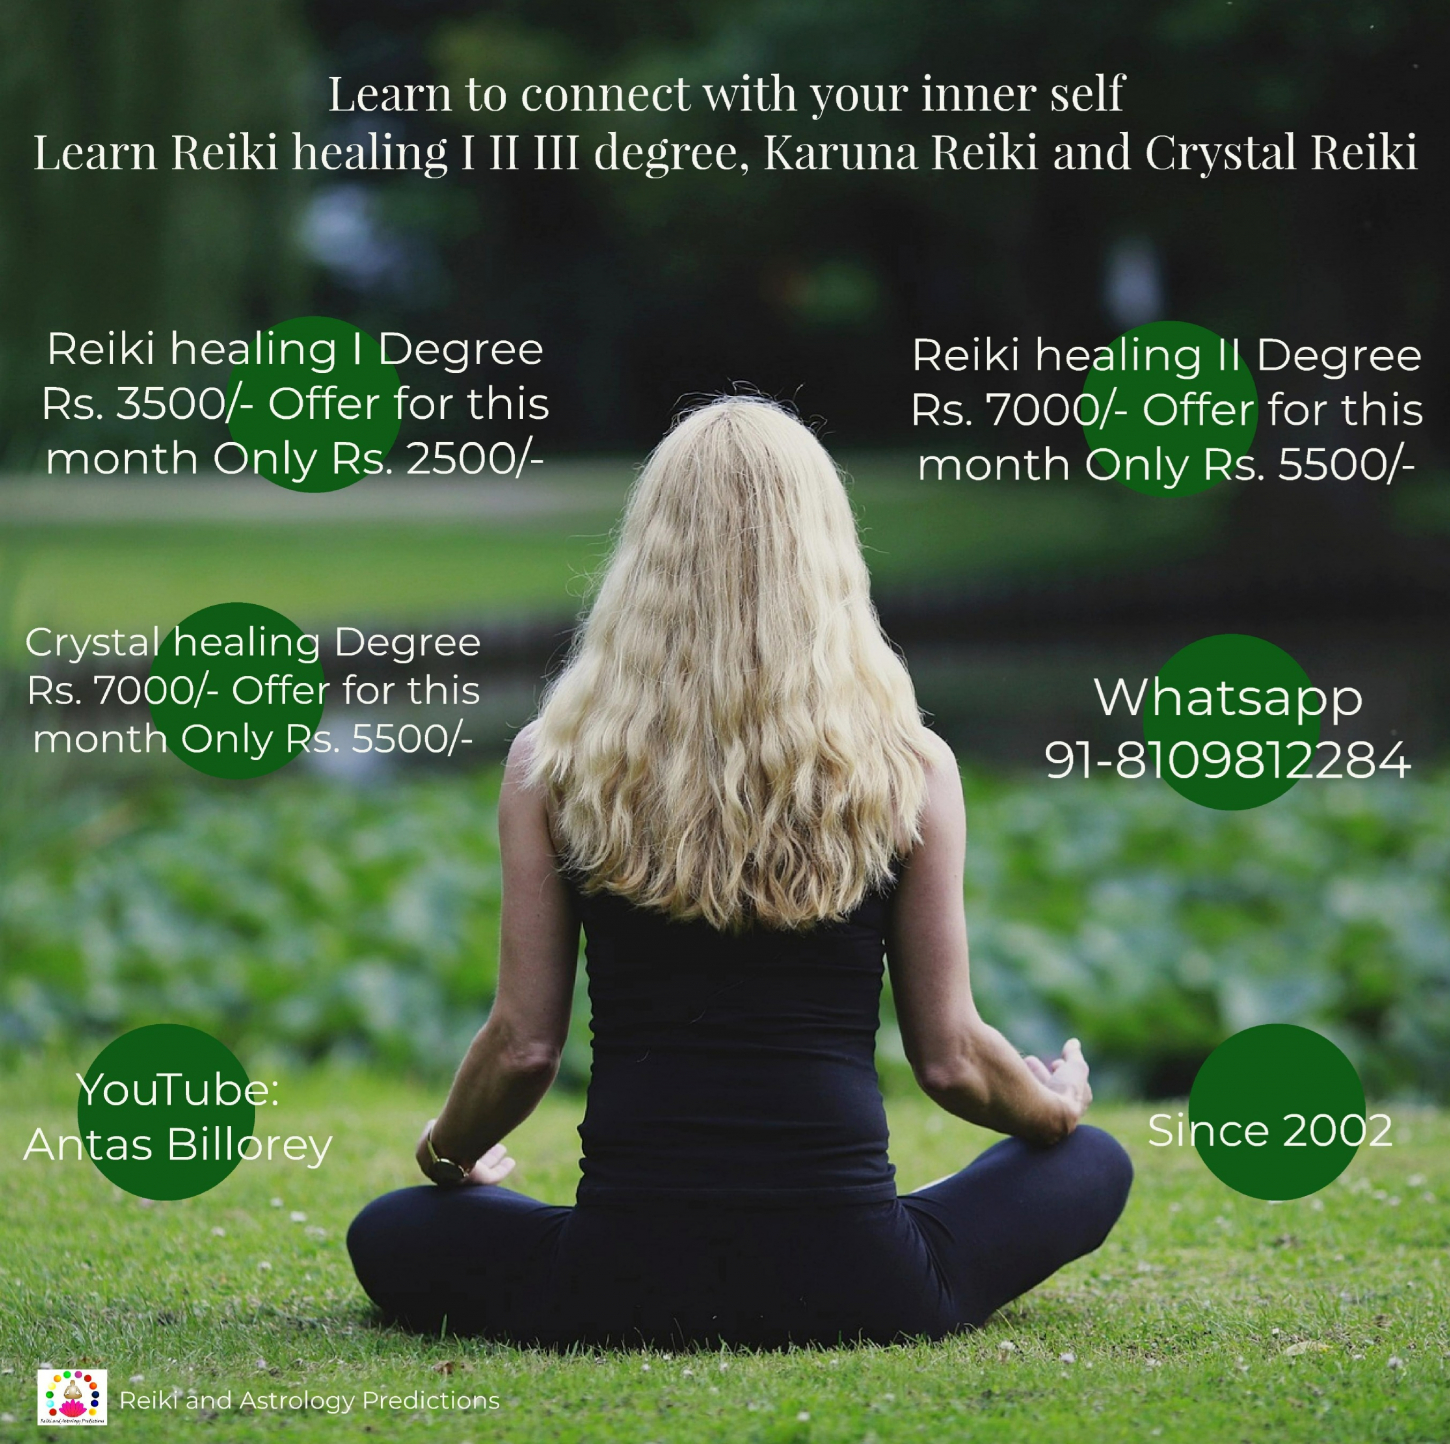 gallery/learn to connect with your inner self learn reiki healing i ii iii degree karuna reiki and crystal reiki